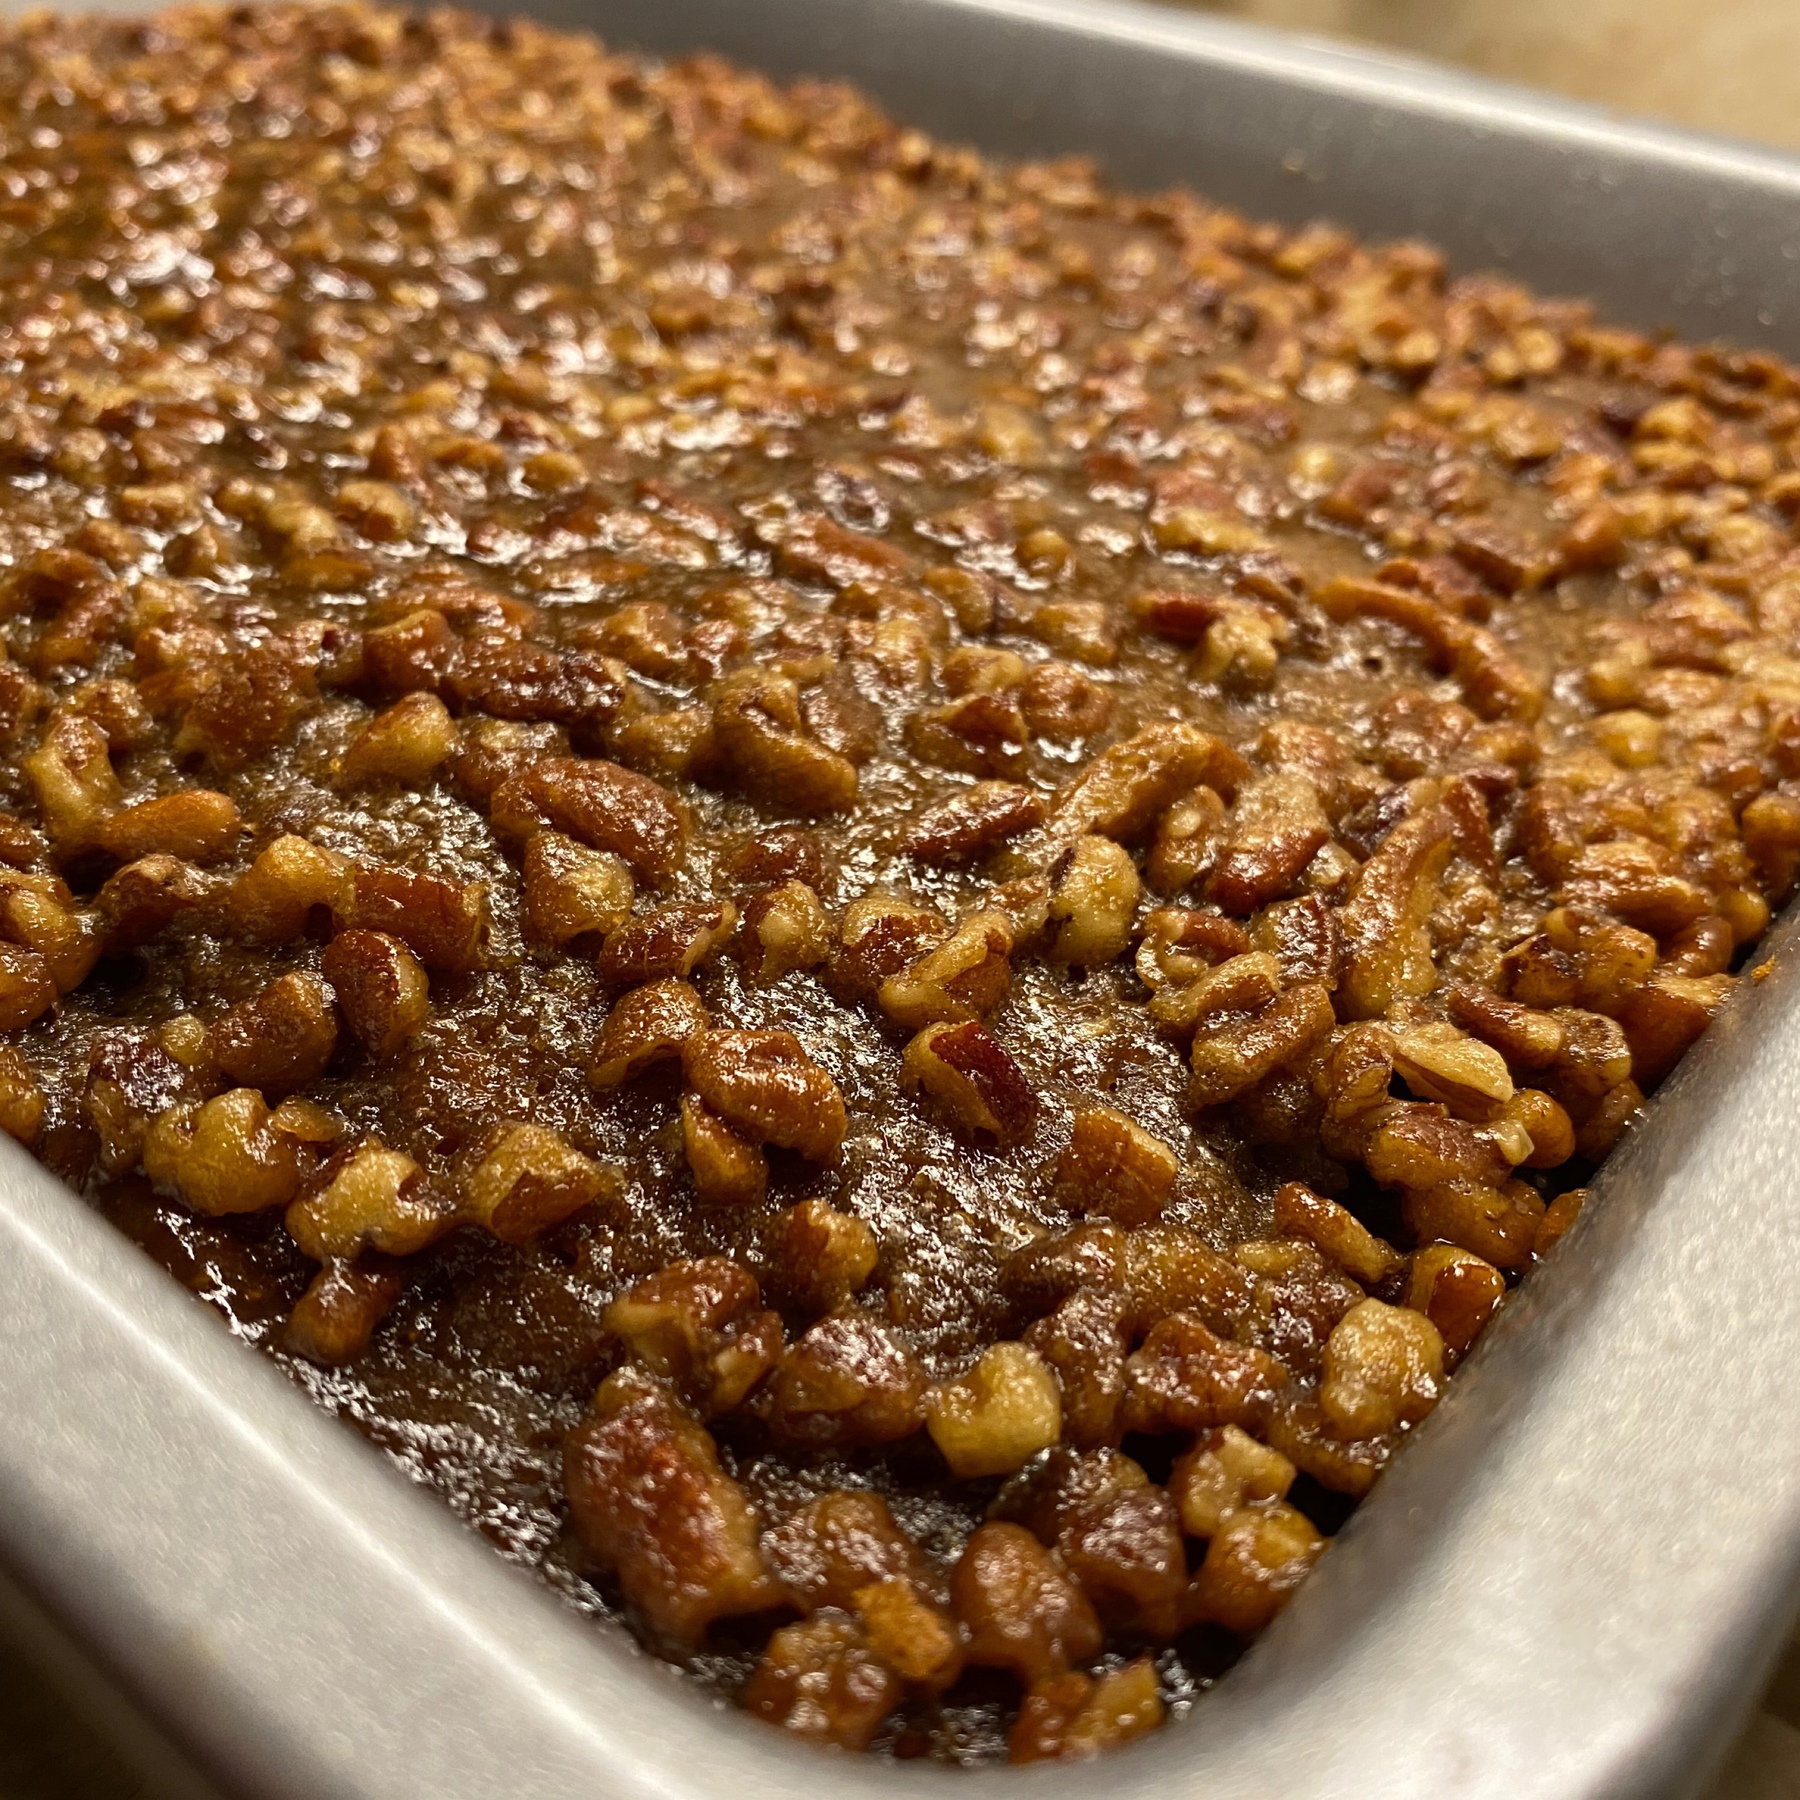 Pecans in glaze on top of cake.